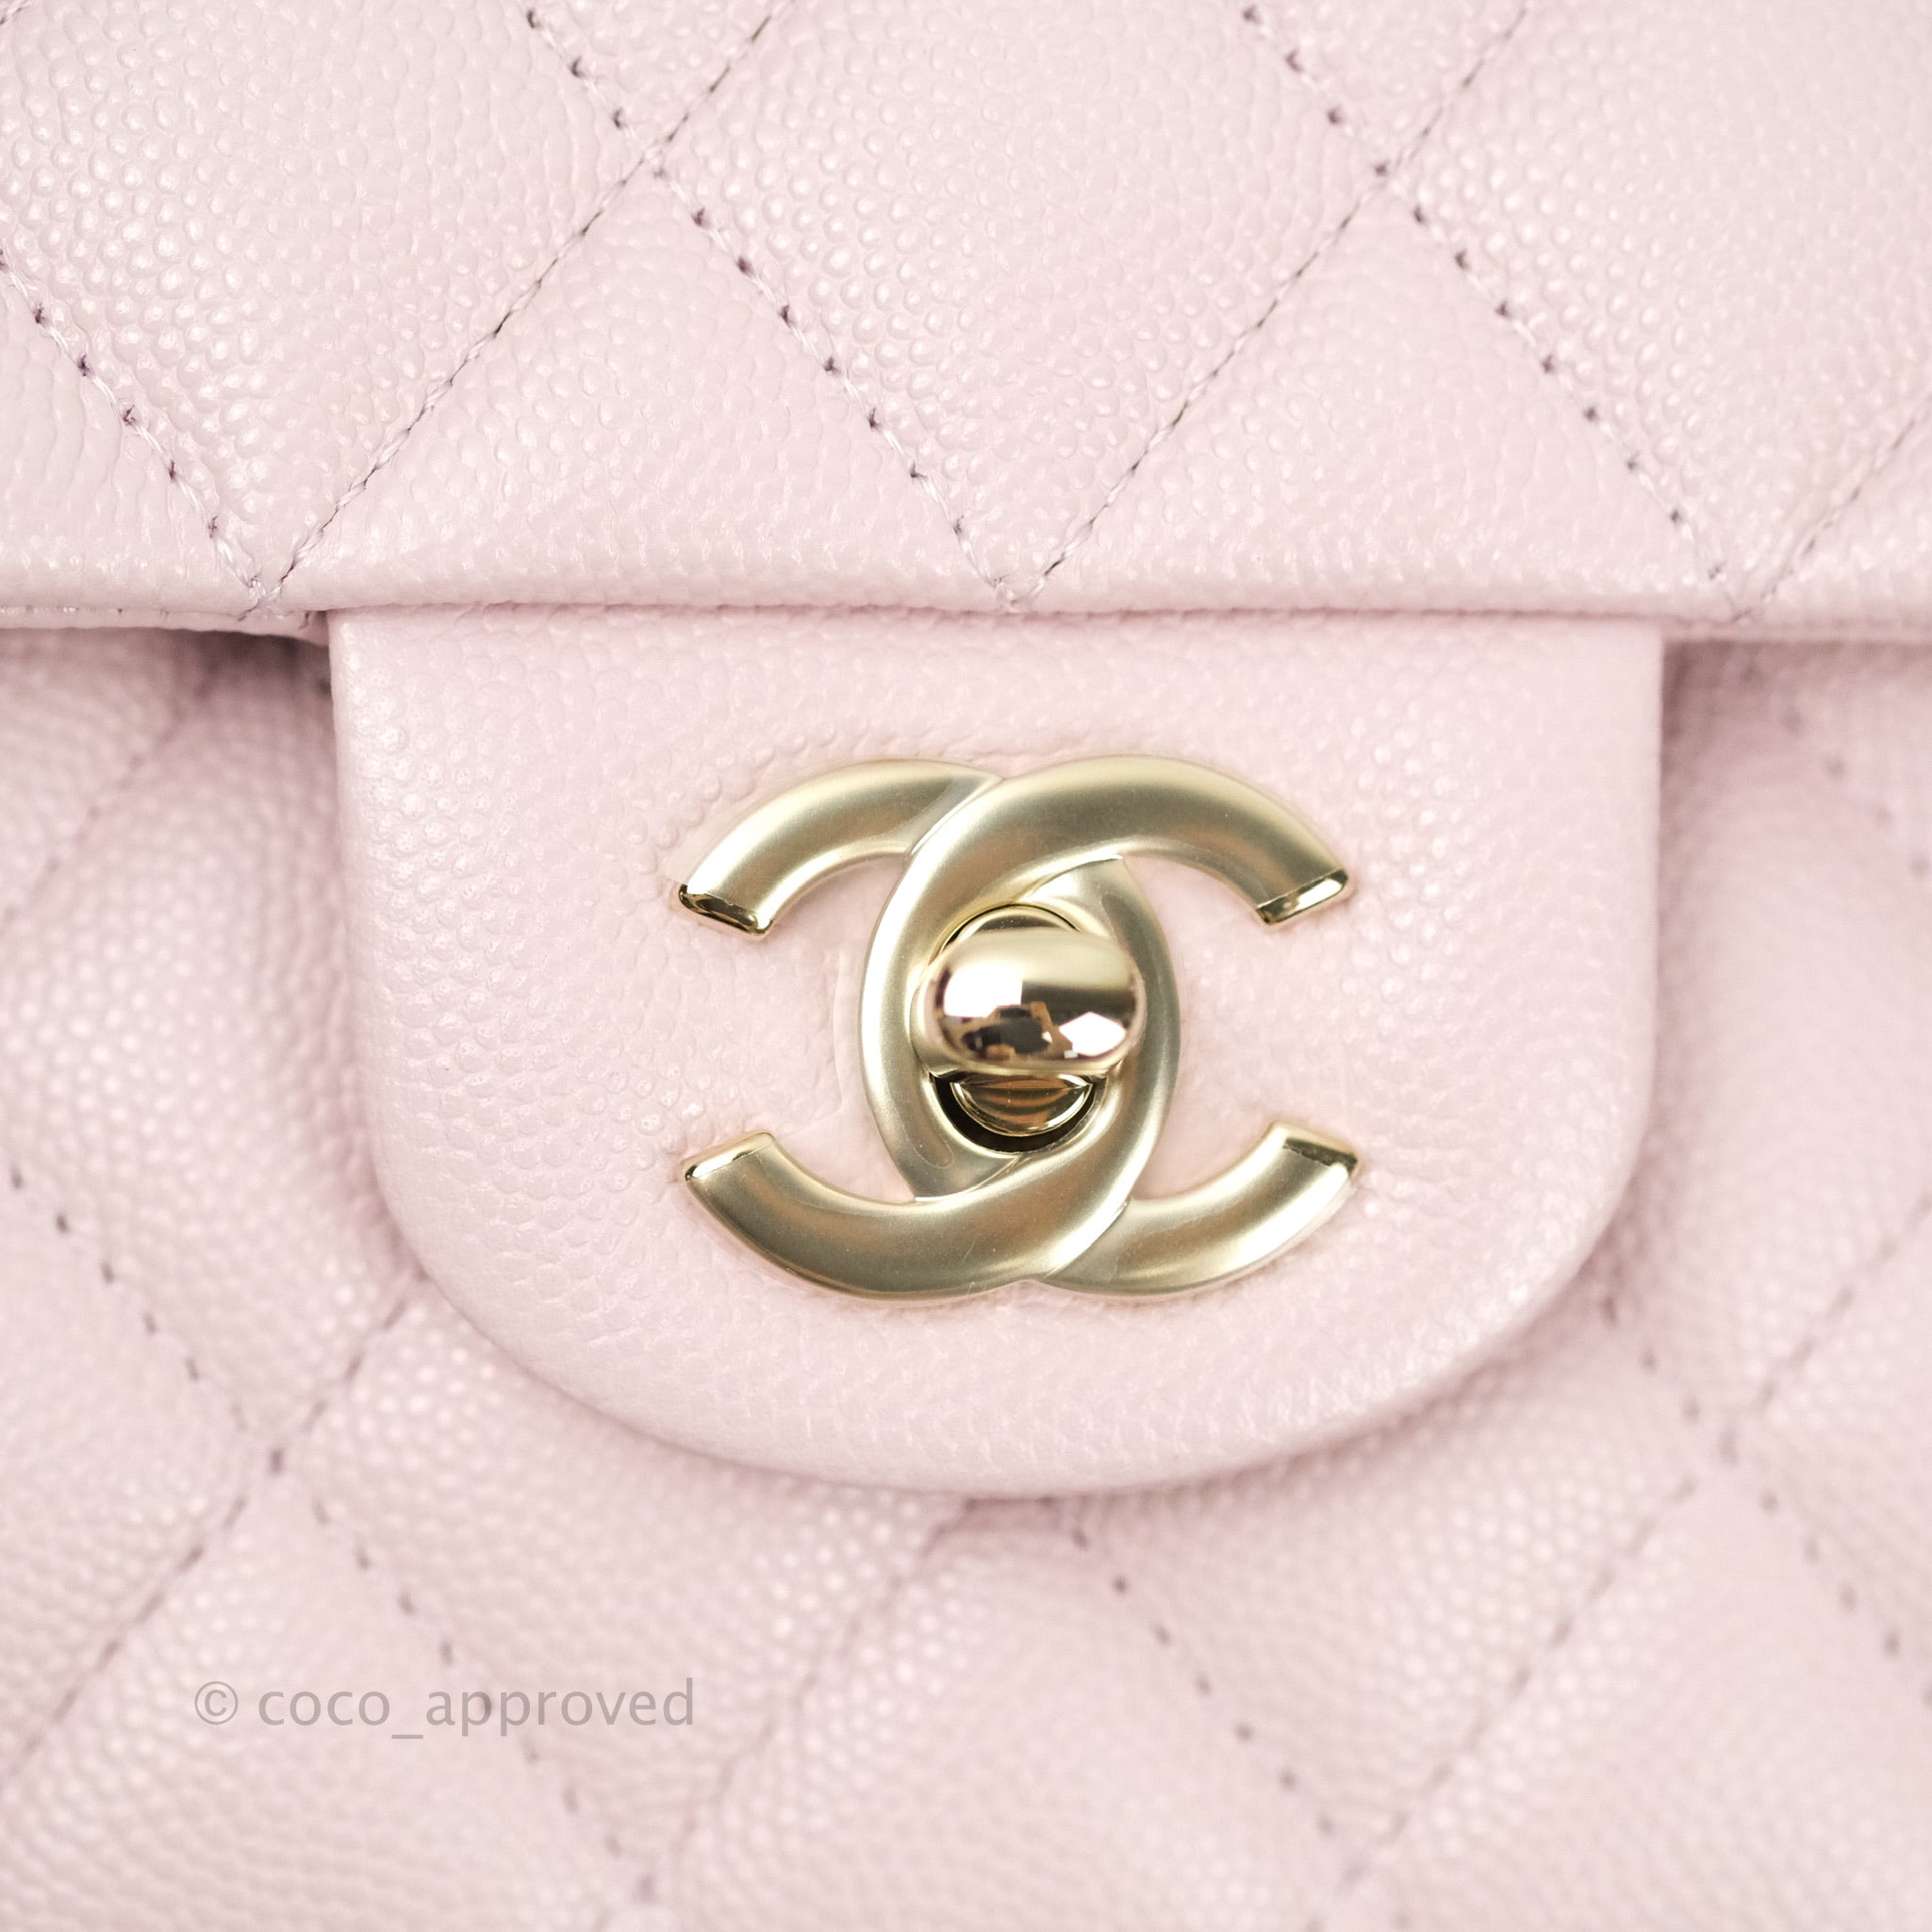 Chanel Lilac Caviar Medium Classic Flap Bag ○ Labellov ○ Buy and Sell  Authentic Luxury